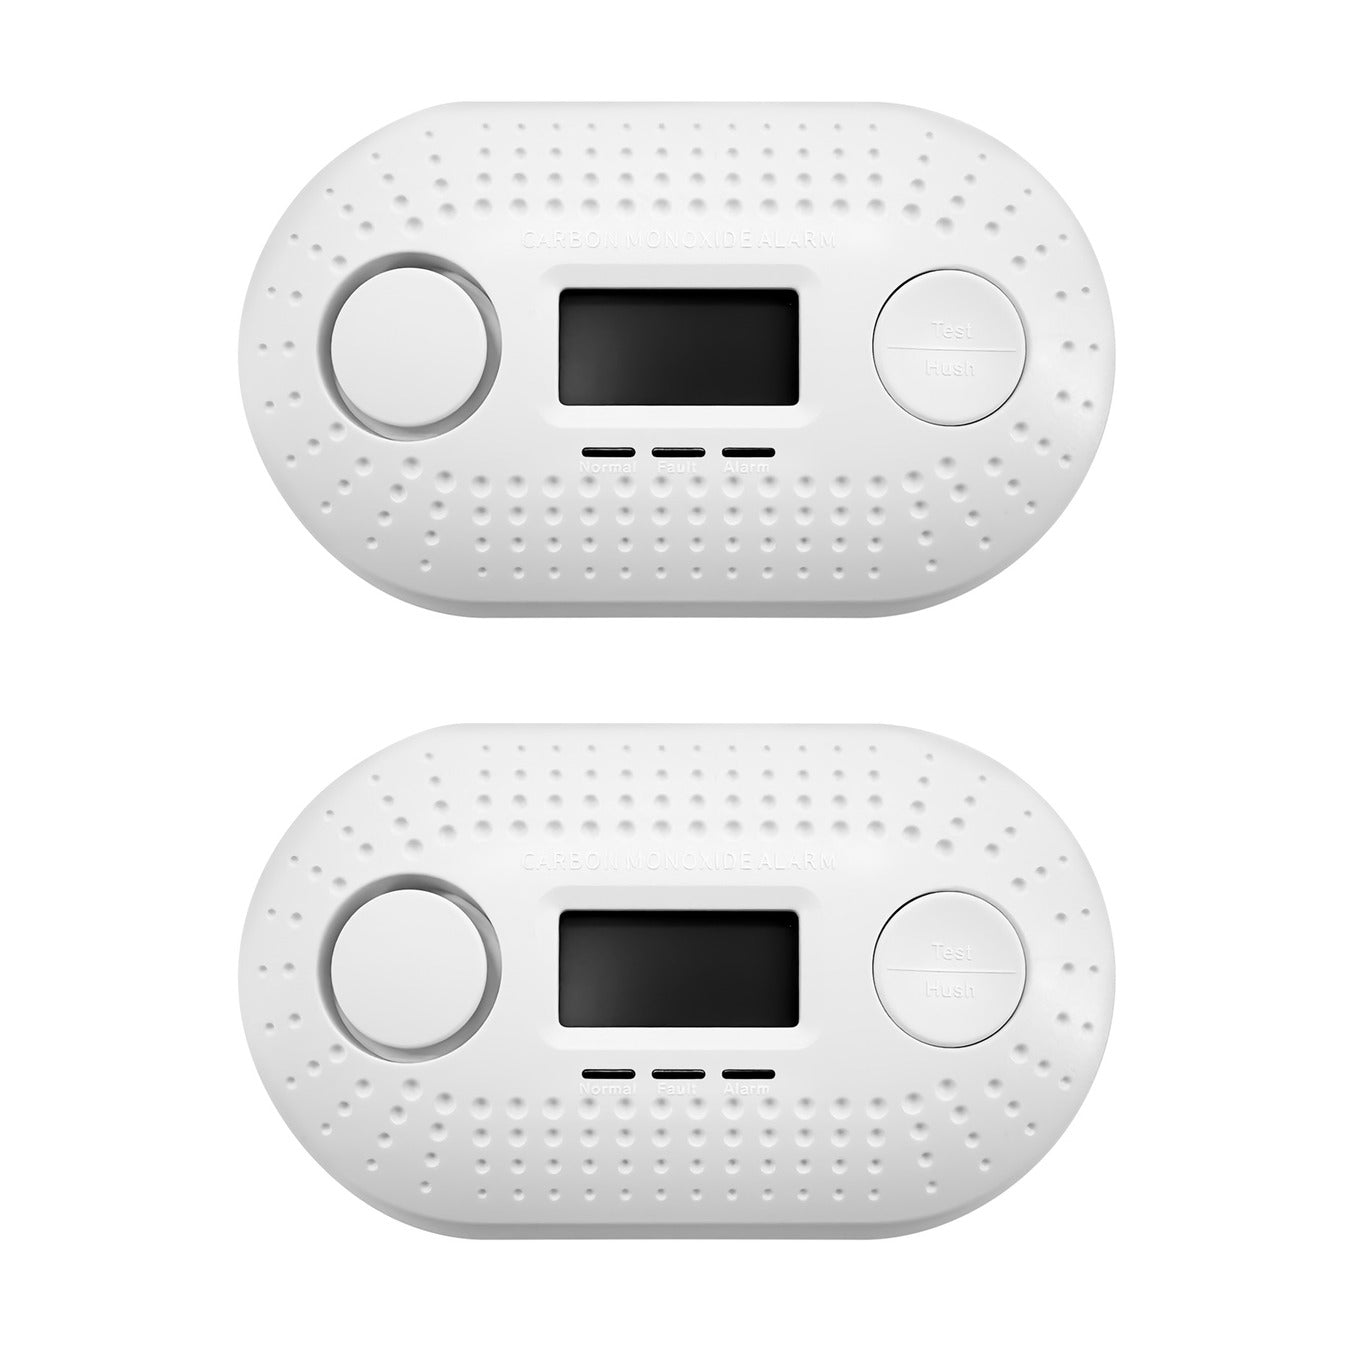 Two Pack - Firexo Interlinked Carbon Monoxide Alarm with 10 Year Tamper Proof Battery, can be interlinked with Firexo Smoke Alarm and Firexo Heat Alarm (sold separately), CO alarm, White.